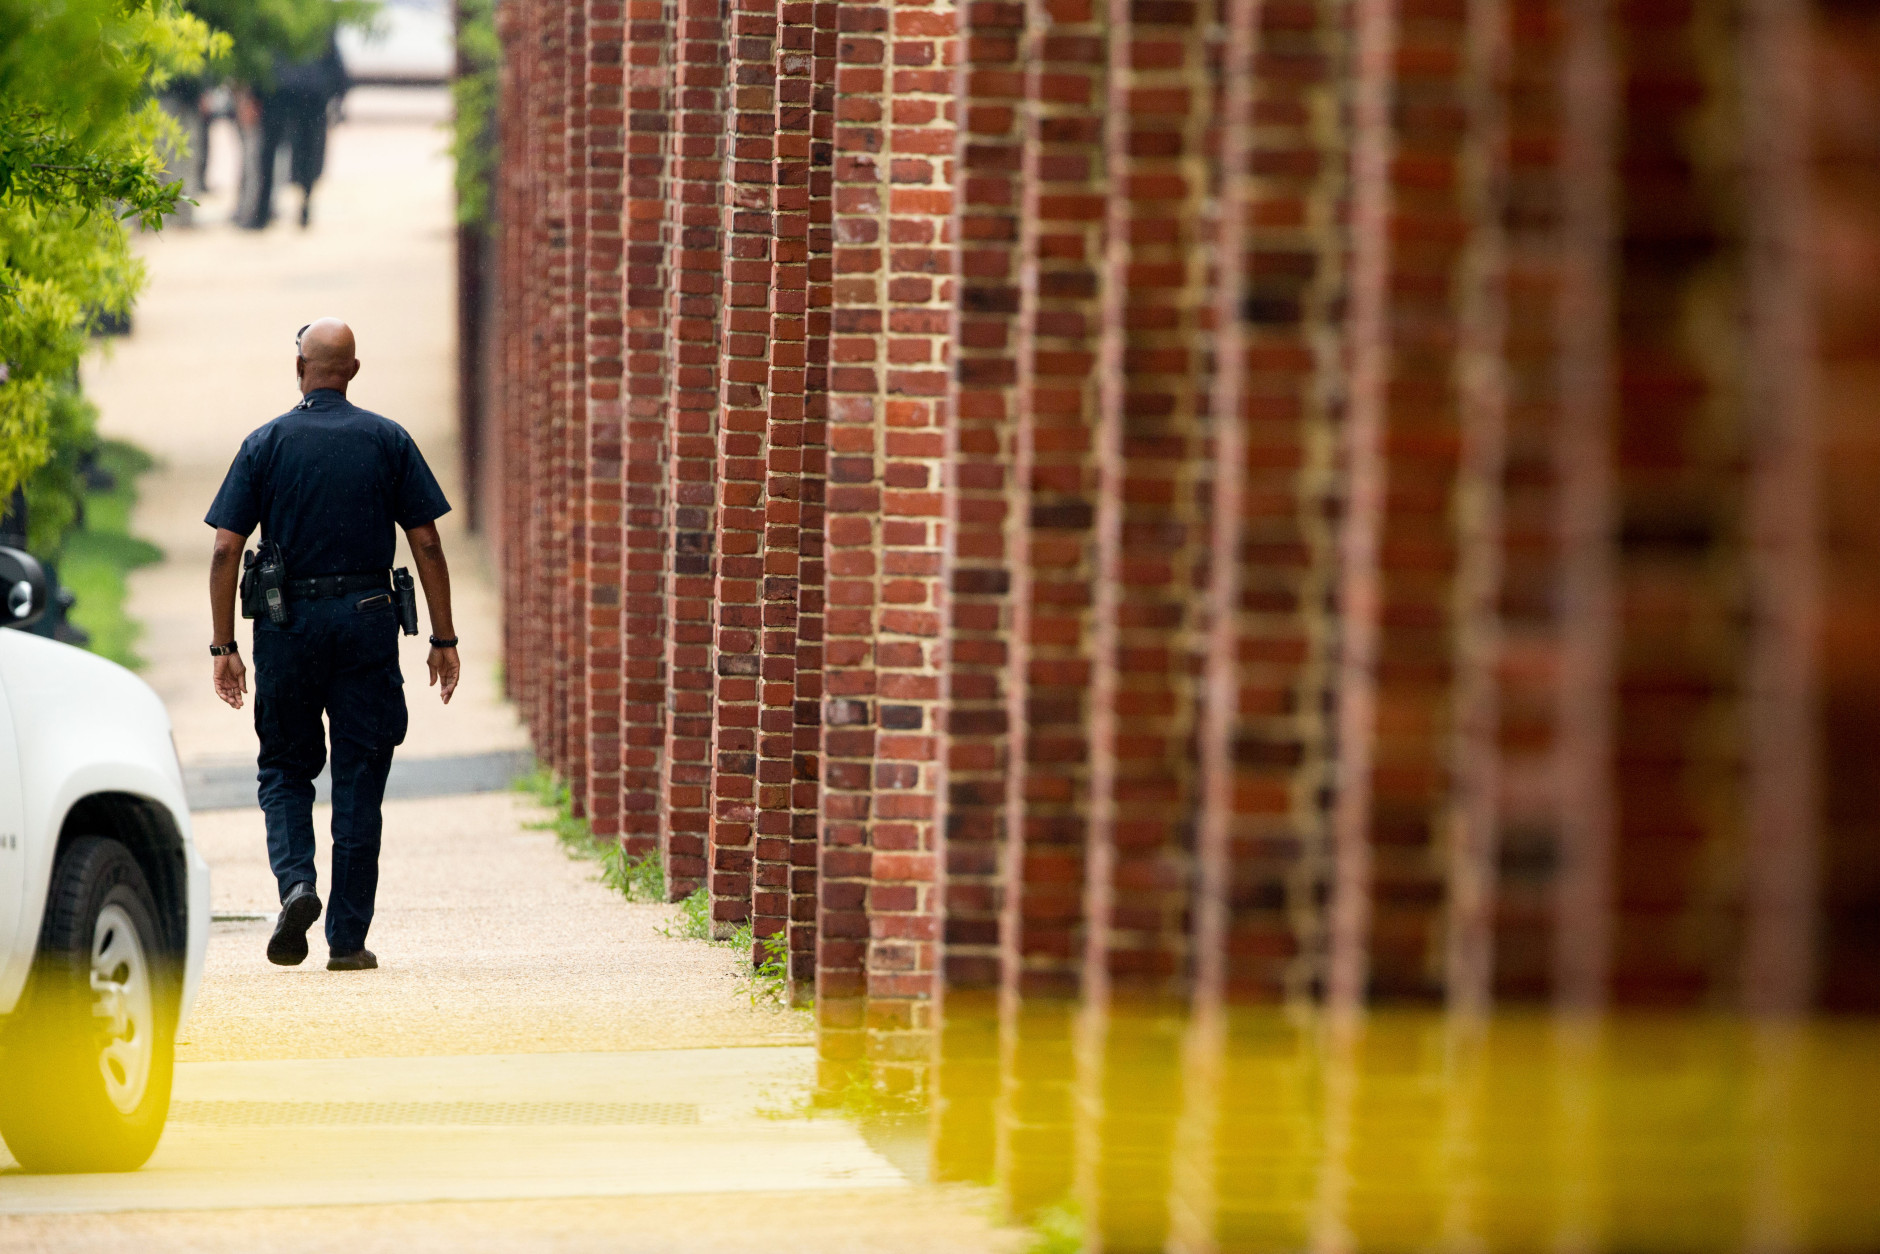 A police officer walks along the perimeter wall of the Washington Navy Yard in Washington, Thursday, July 2, 2015, after an official said shots have been reported in a building on the Washington Navy Yard campus.  (AP Photo/Andrew Harnik)